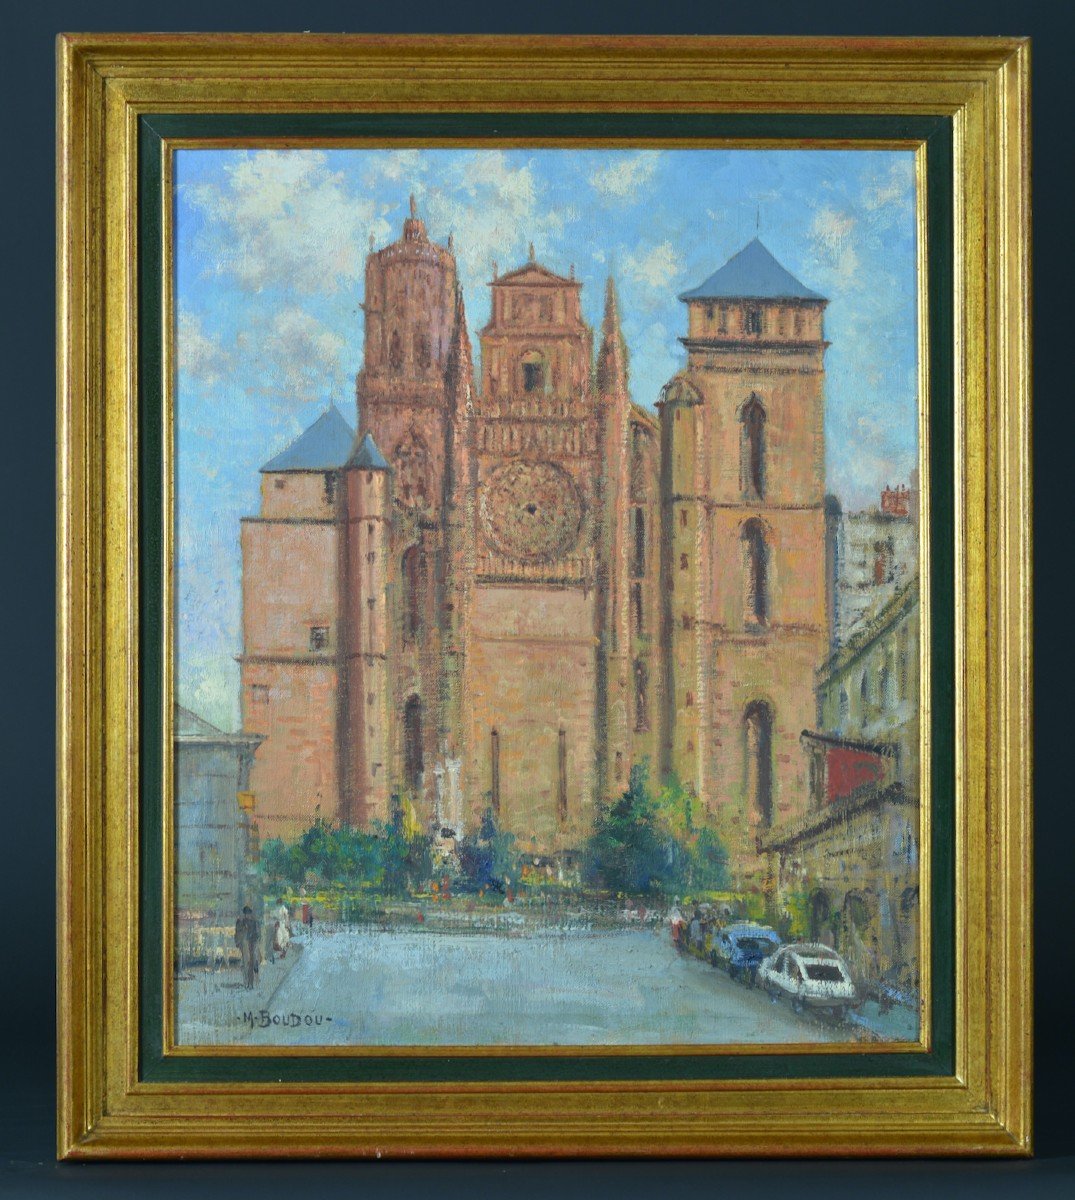 Beautiful Old Painting Marcel Boudou View From Rodez Aveyron Notre Dame Cathedral